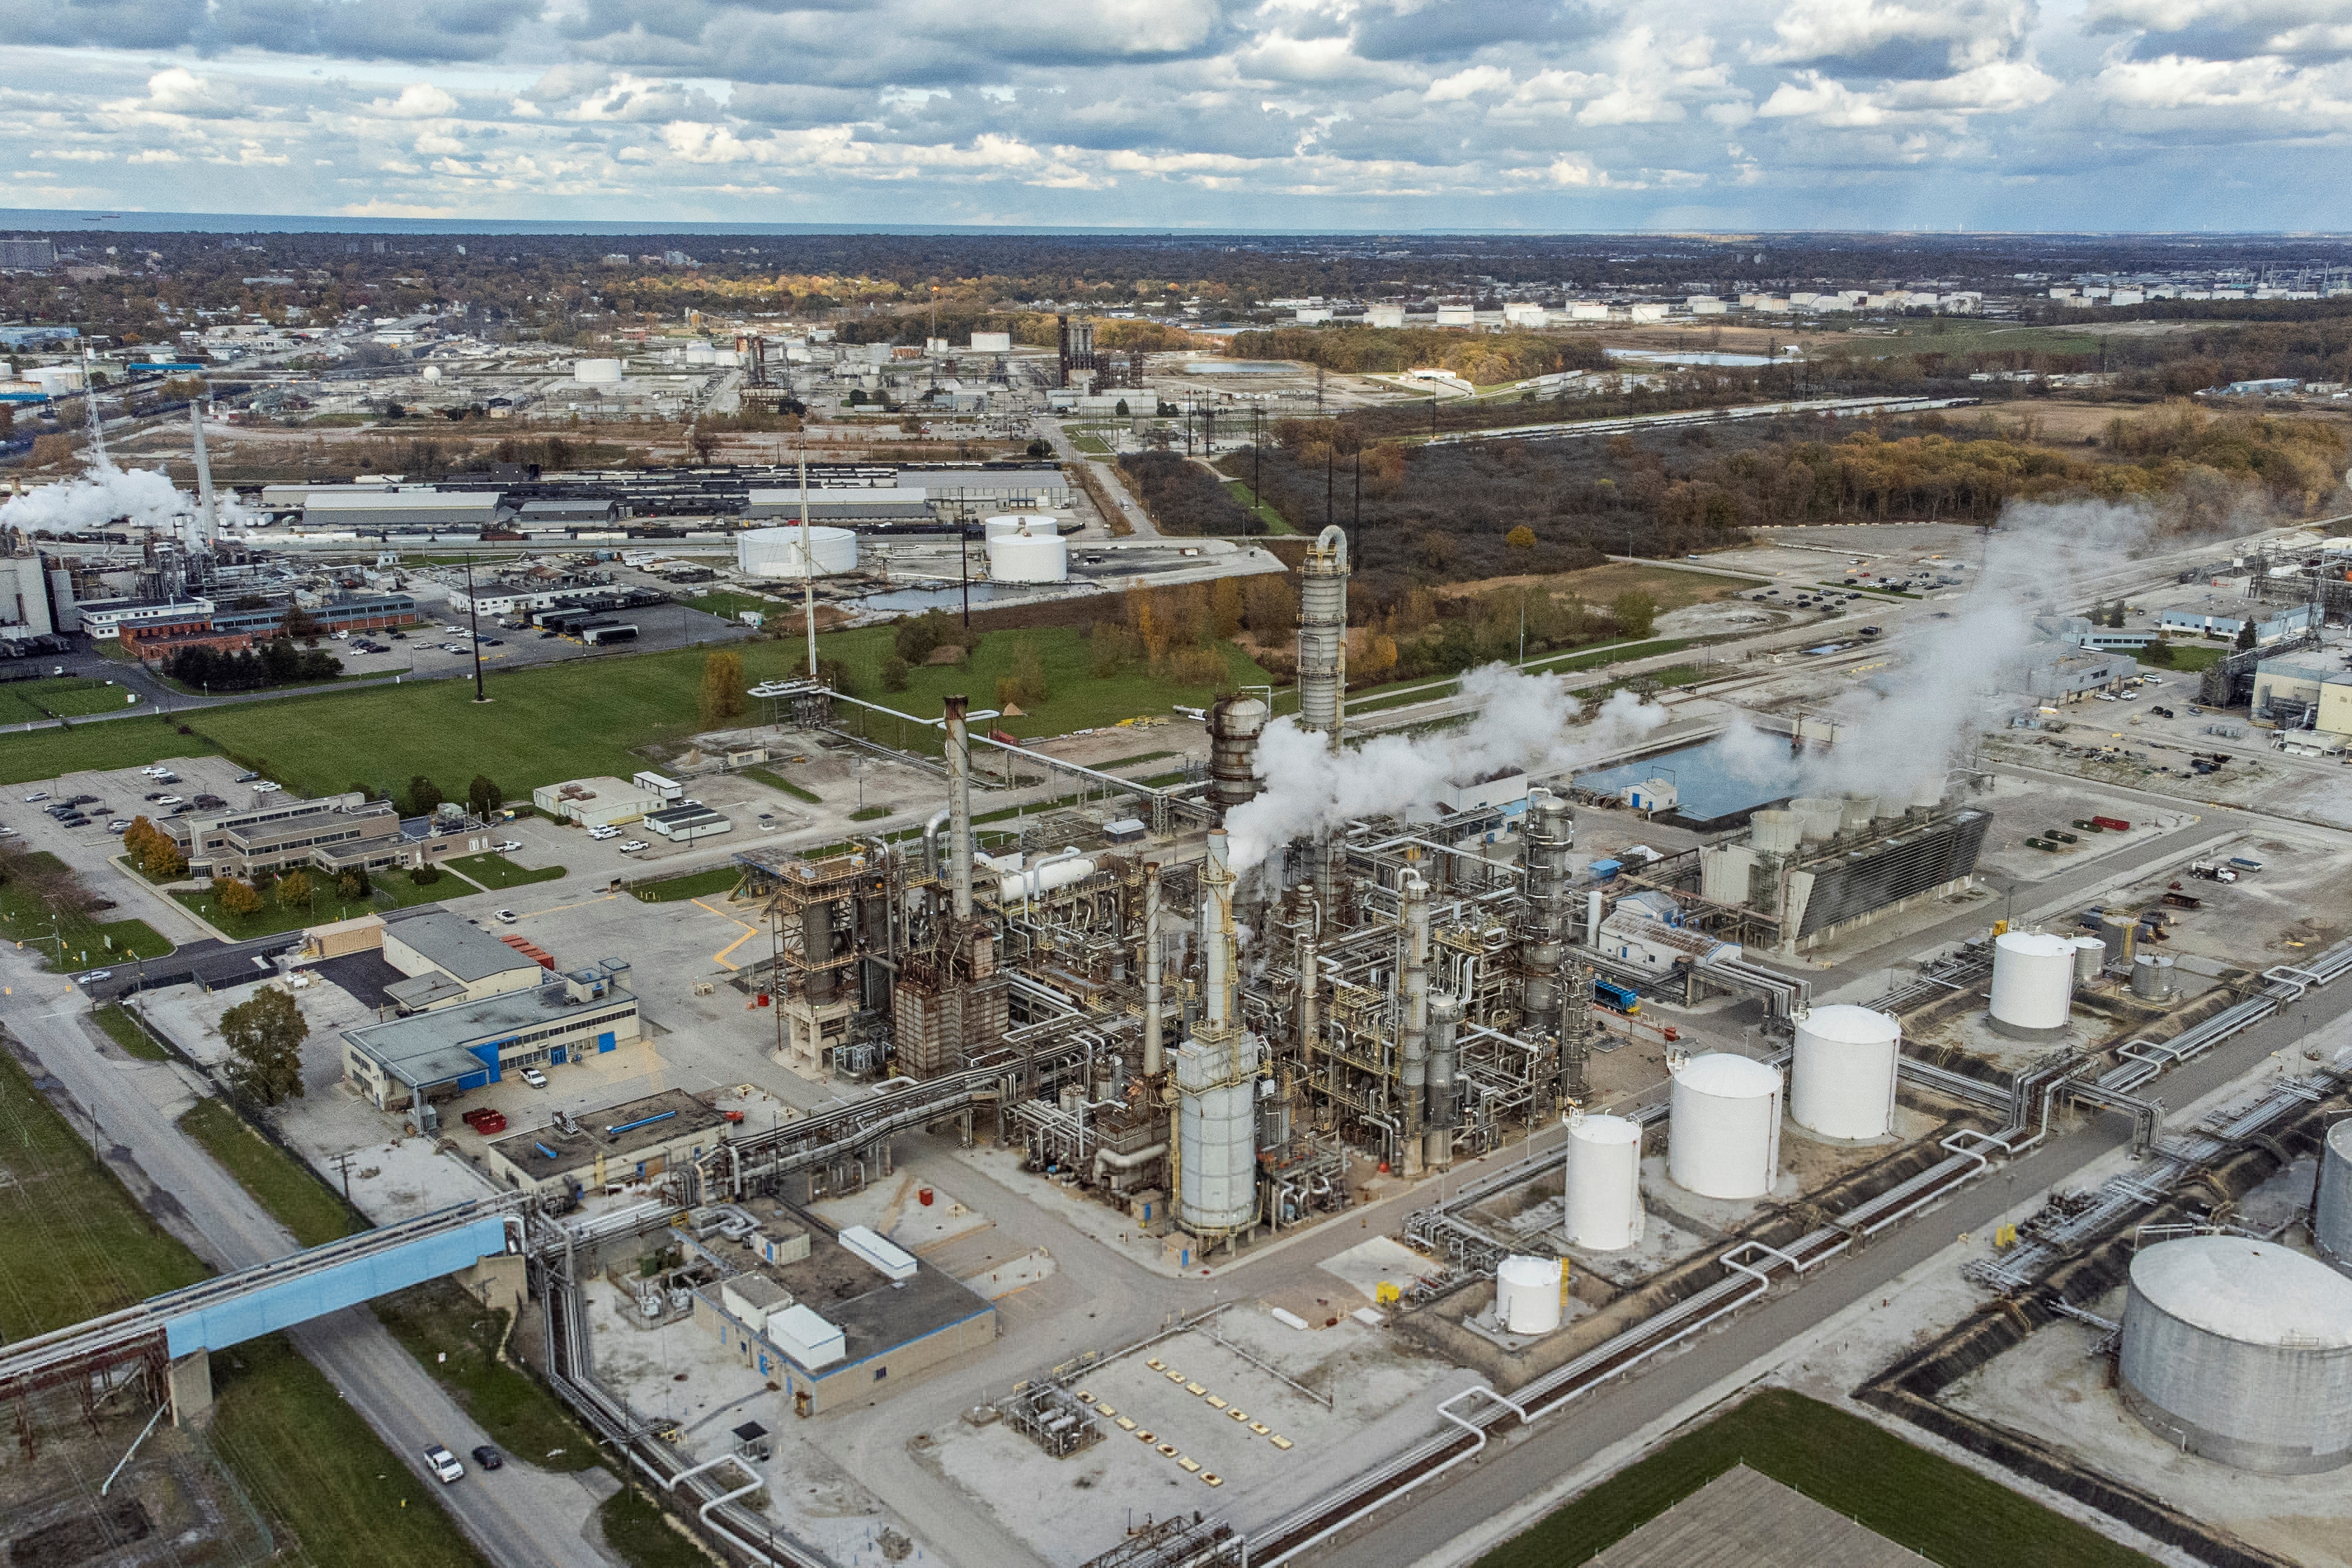 INEOS Styrolution Canada Ltd in Canada's "Chemical Valley" in Sarnia